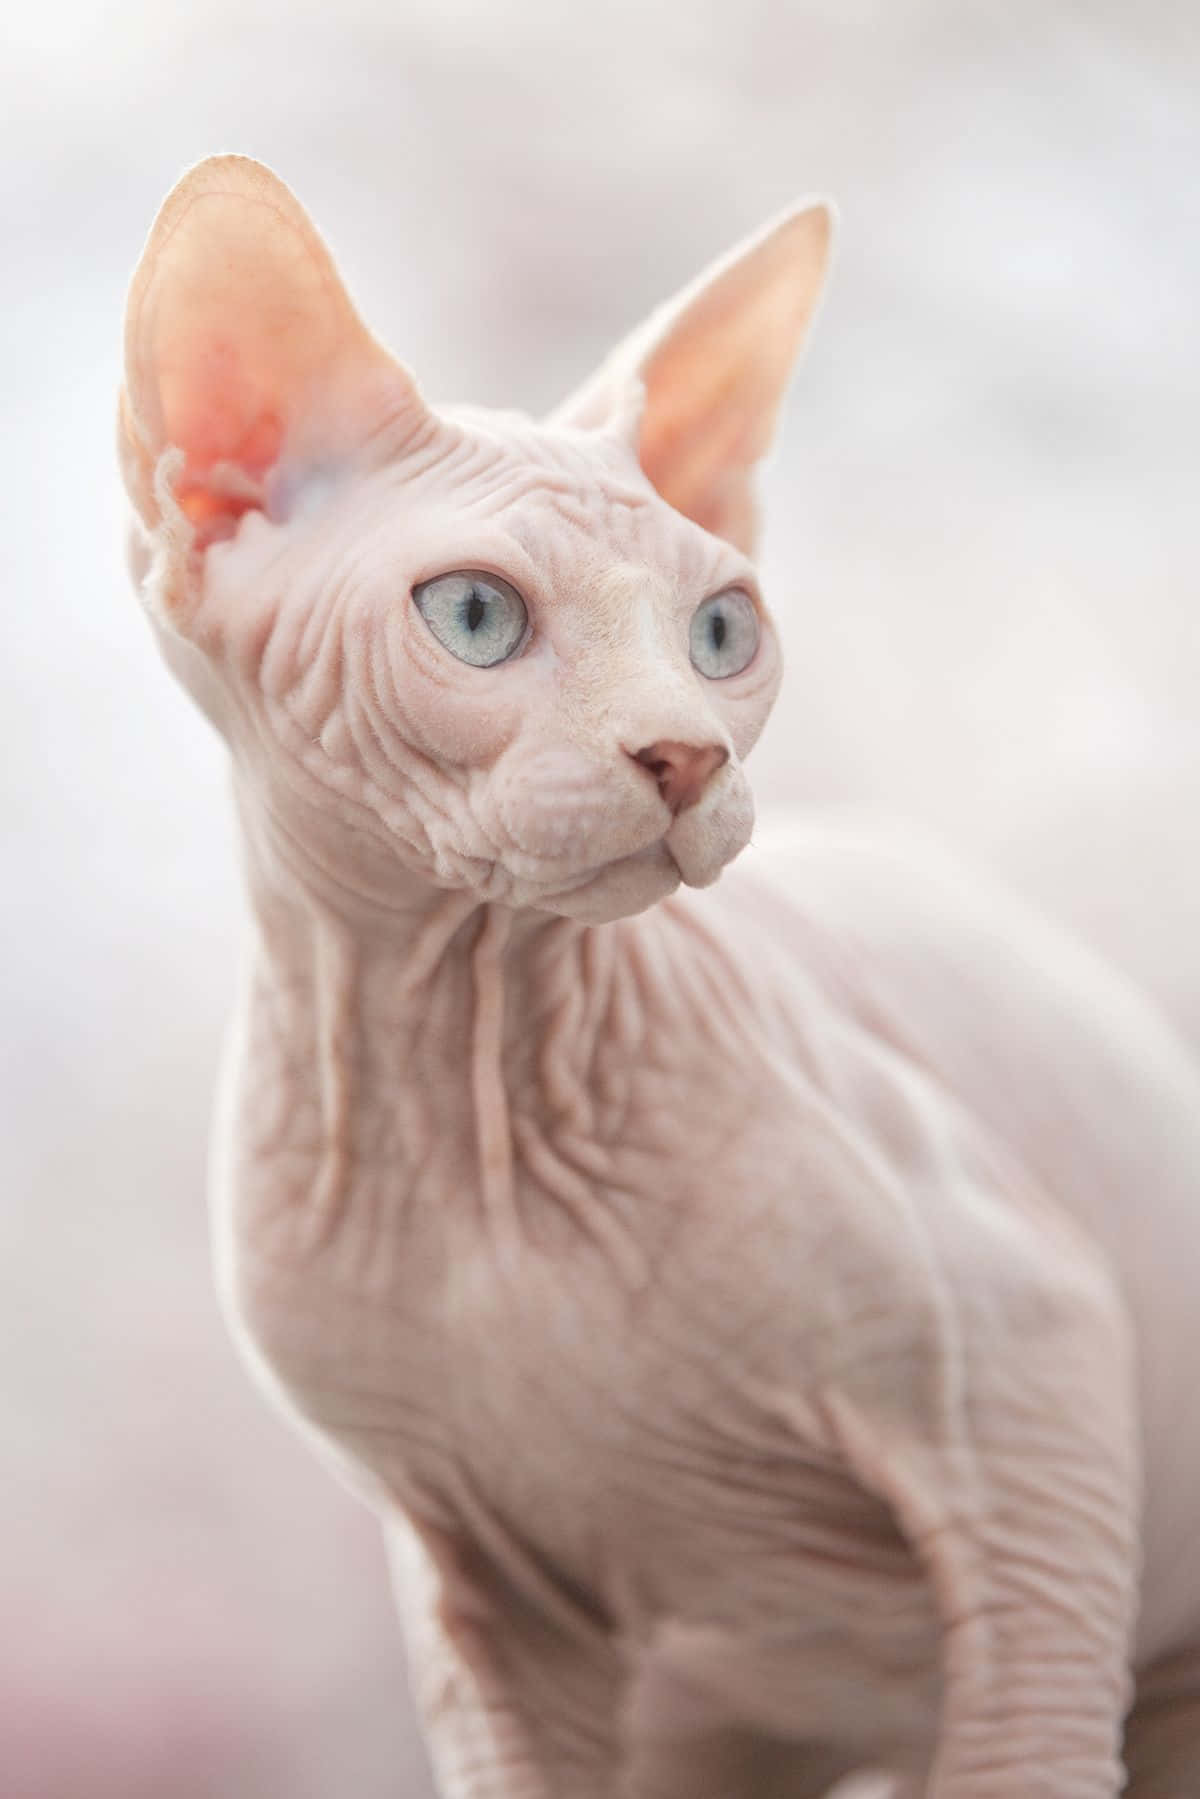 Captivating Gaze of the Royalty: A Portrait of the Sphynx Cat Wallpaper